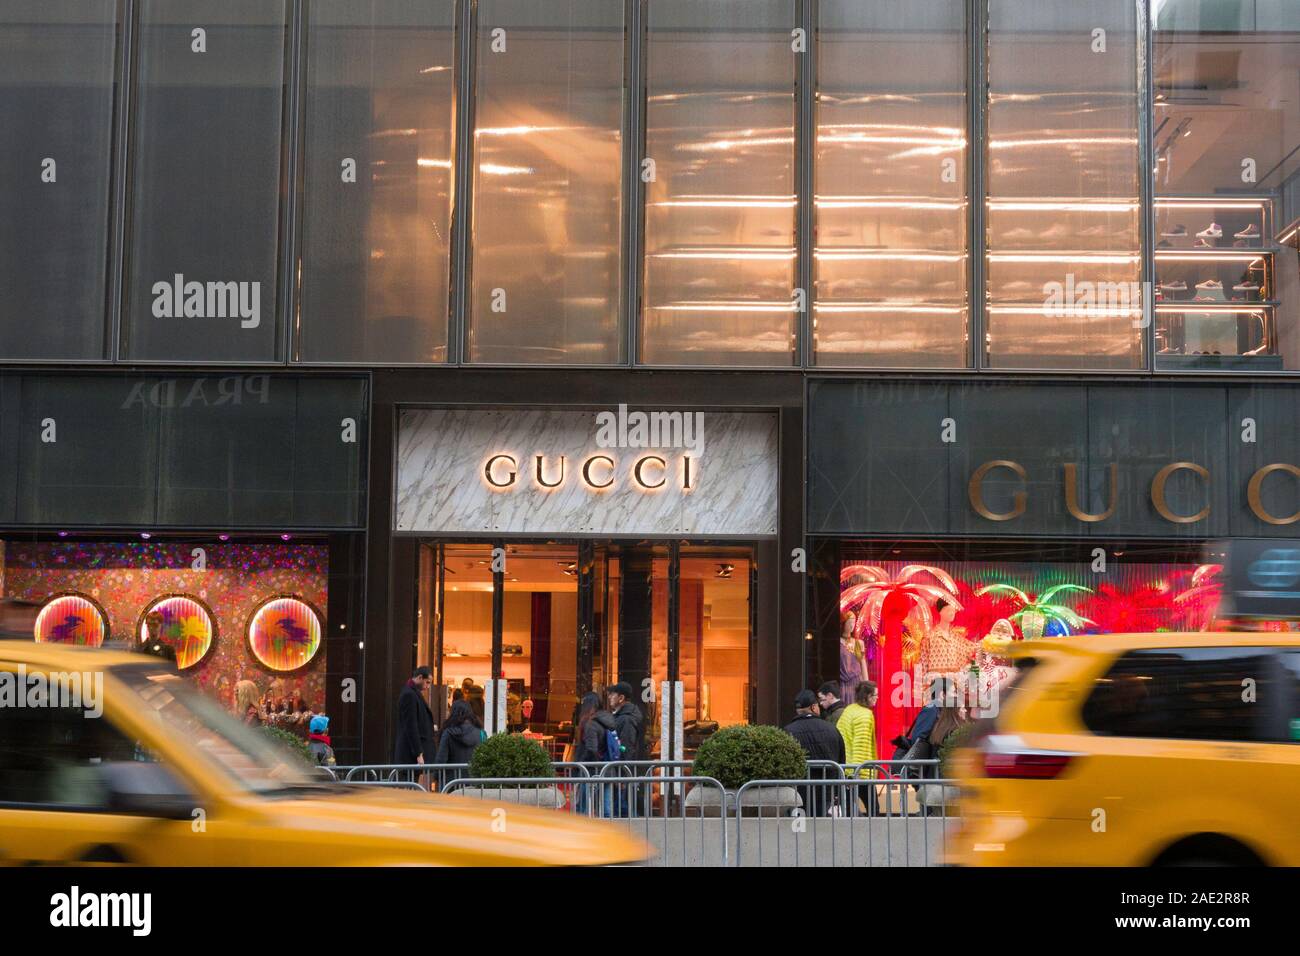 People shop in the Gucci department at a Saks Fifth Avenue store